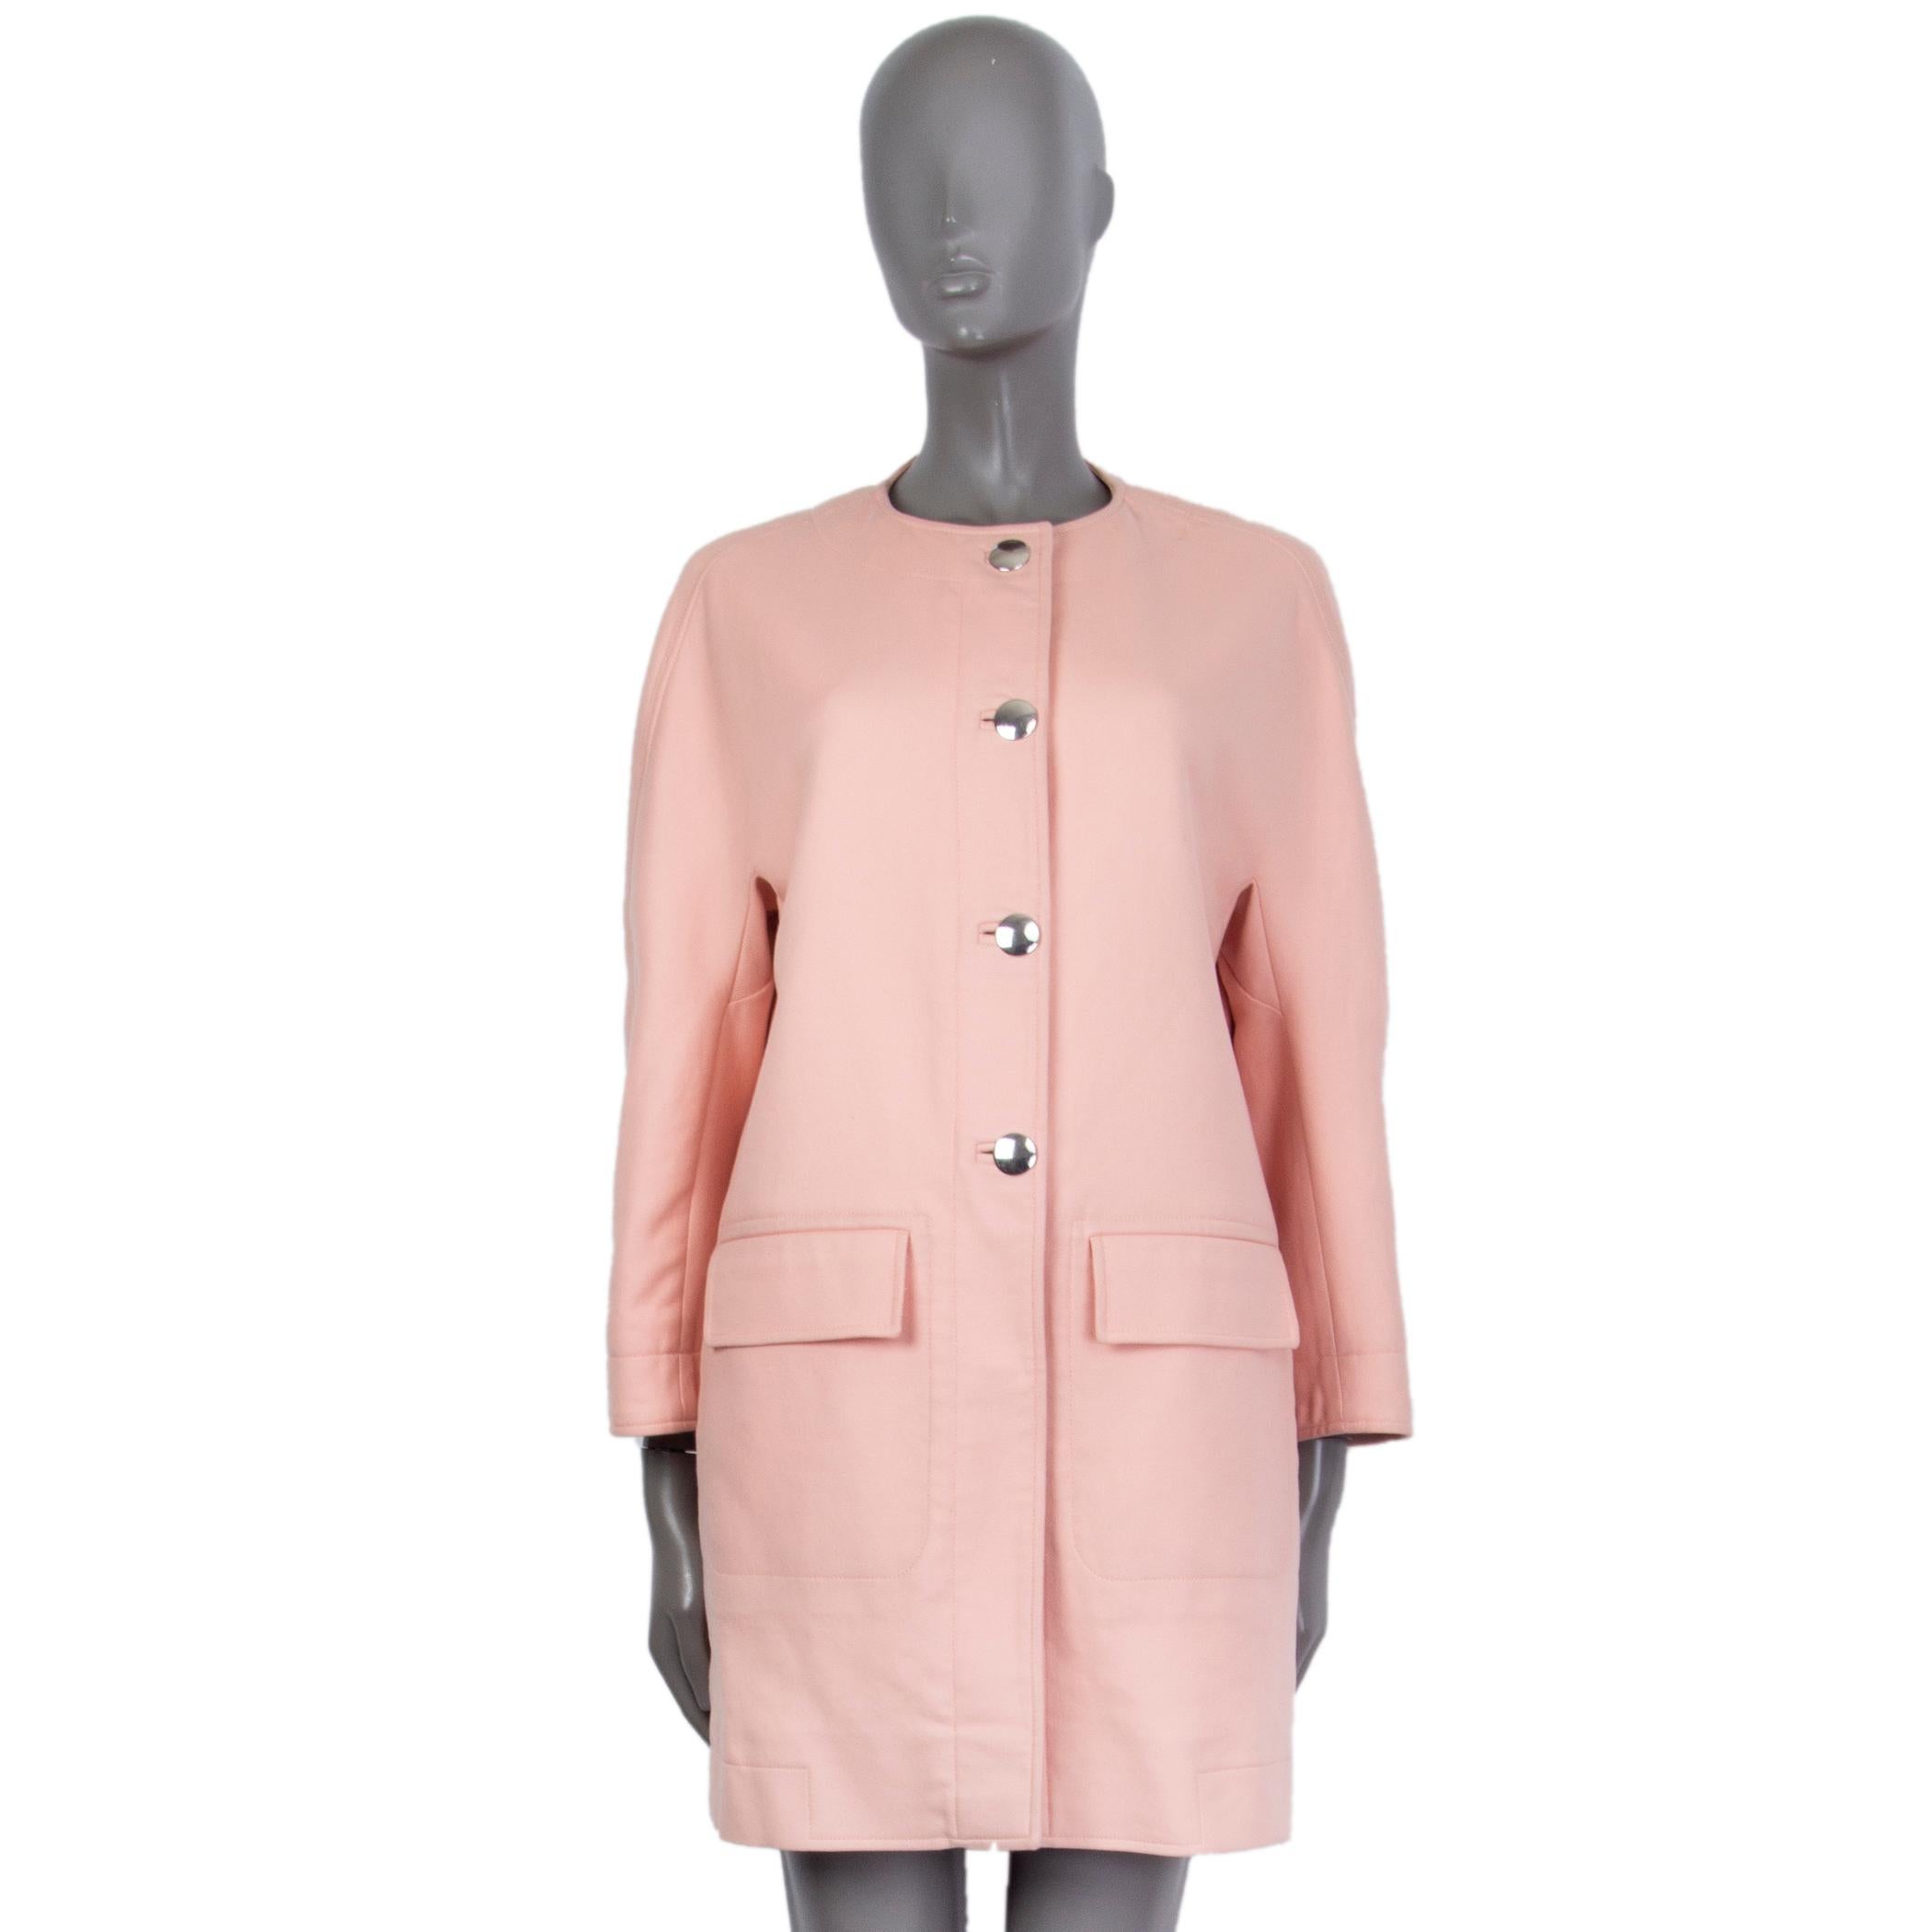 100% authentic Balenciaga collarless transition coat in baby pink cotton (100%) with slit pockets on the sides. Has two frontal docorative flap pockets. Closes on the front with silver tone buttons. Lined in acetate (72%) and elastodien (28%). Has